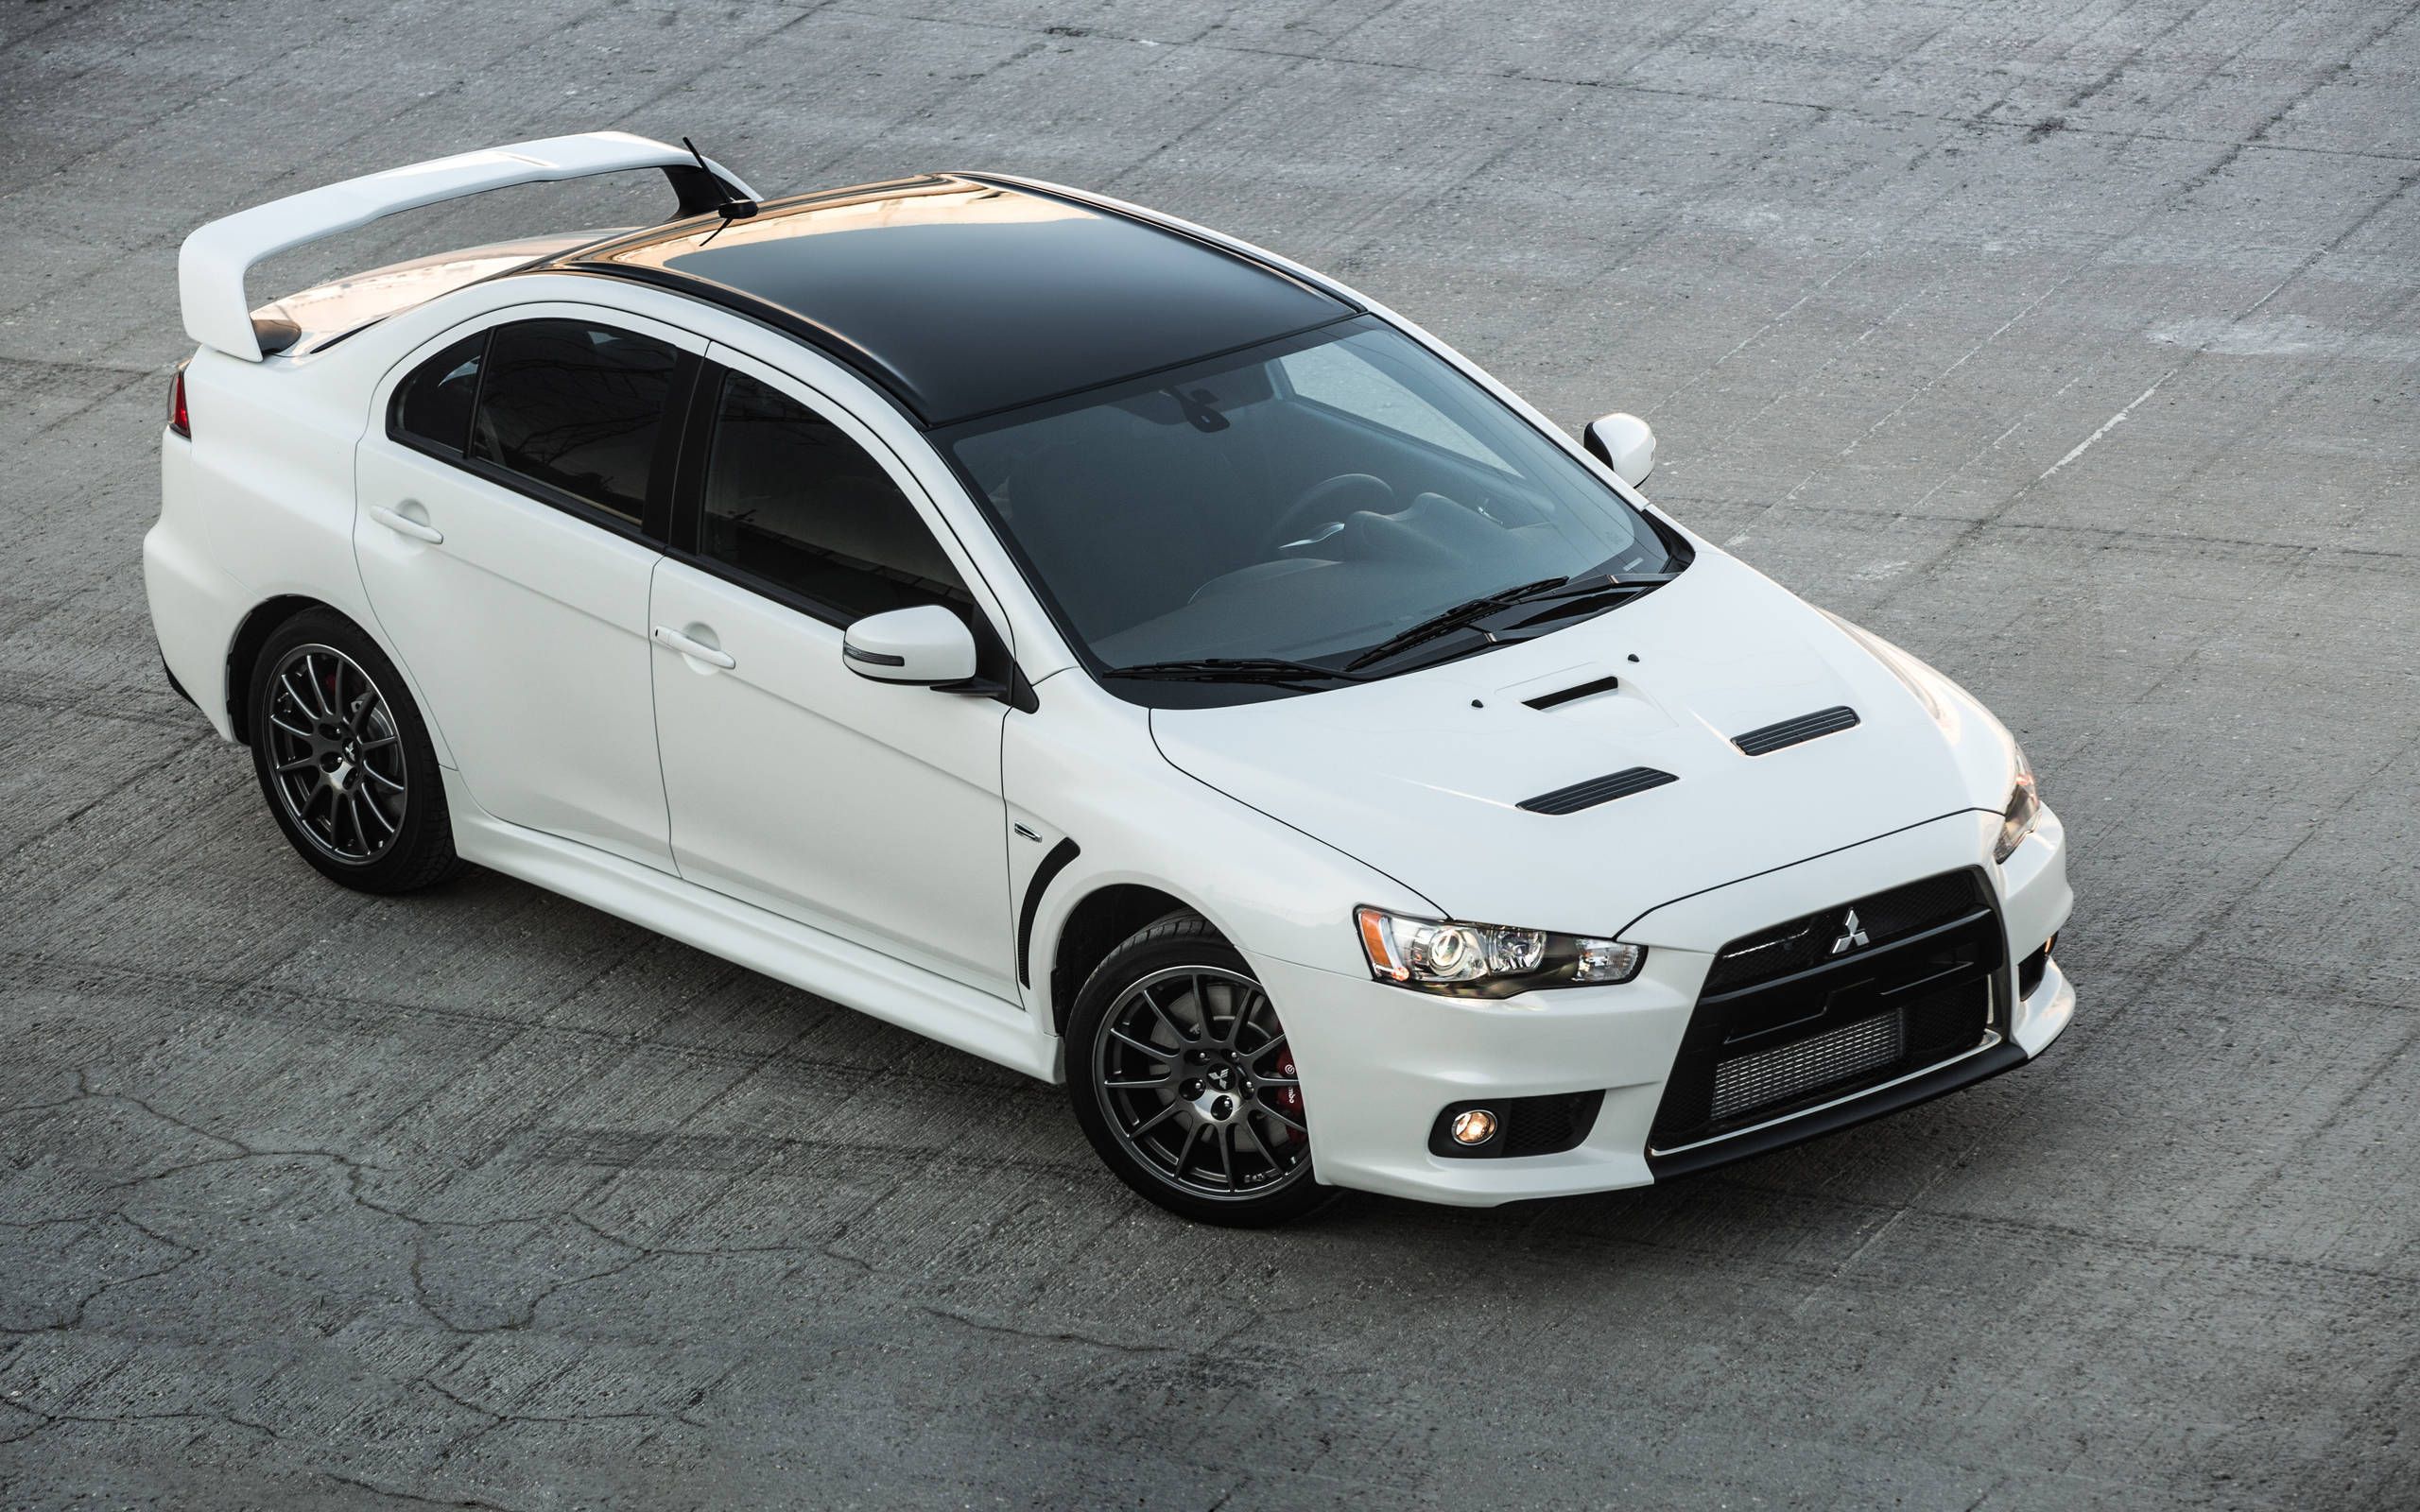 2015 Mitsubishi Lancer Evolution Final Edition review: A fitting send-off